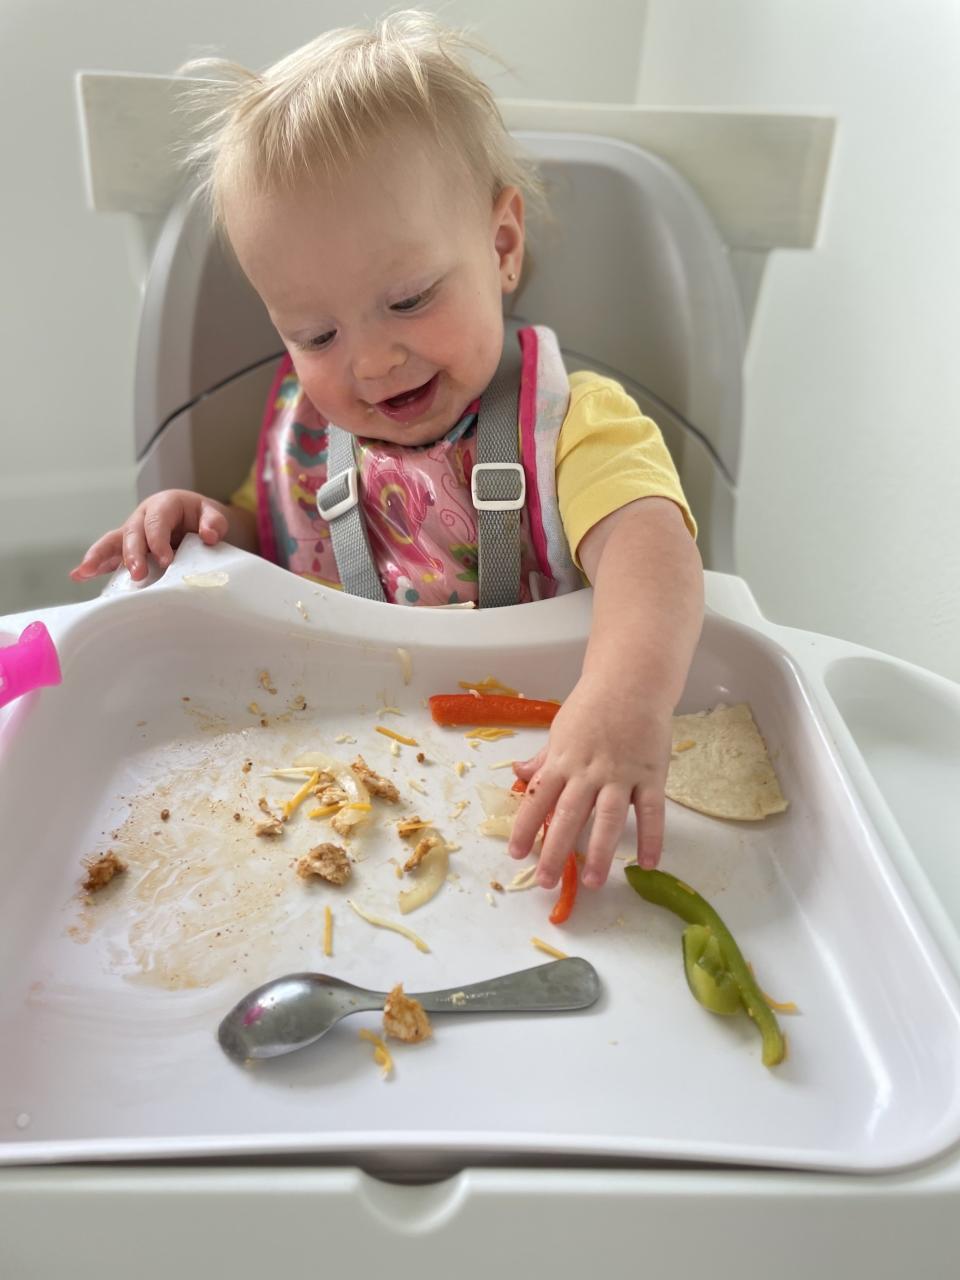 The author's baby eating